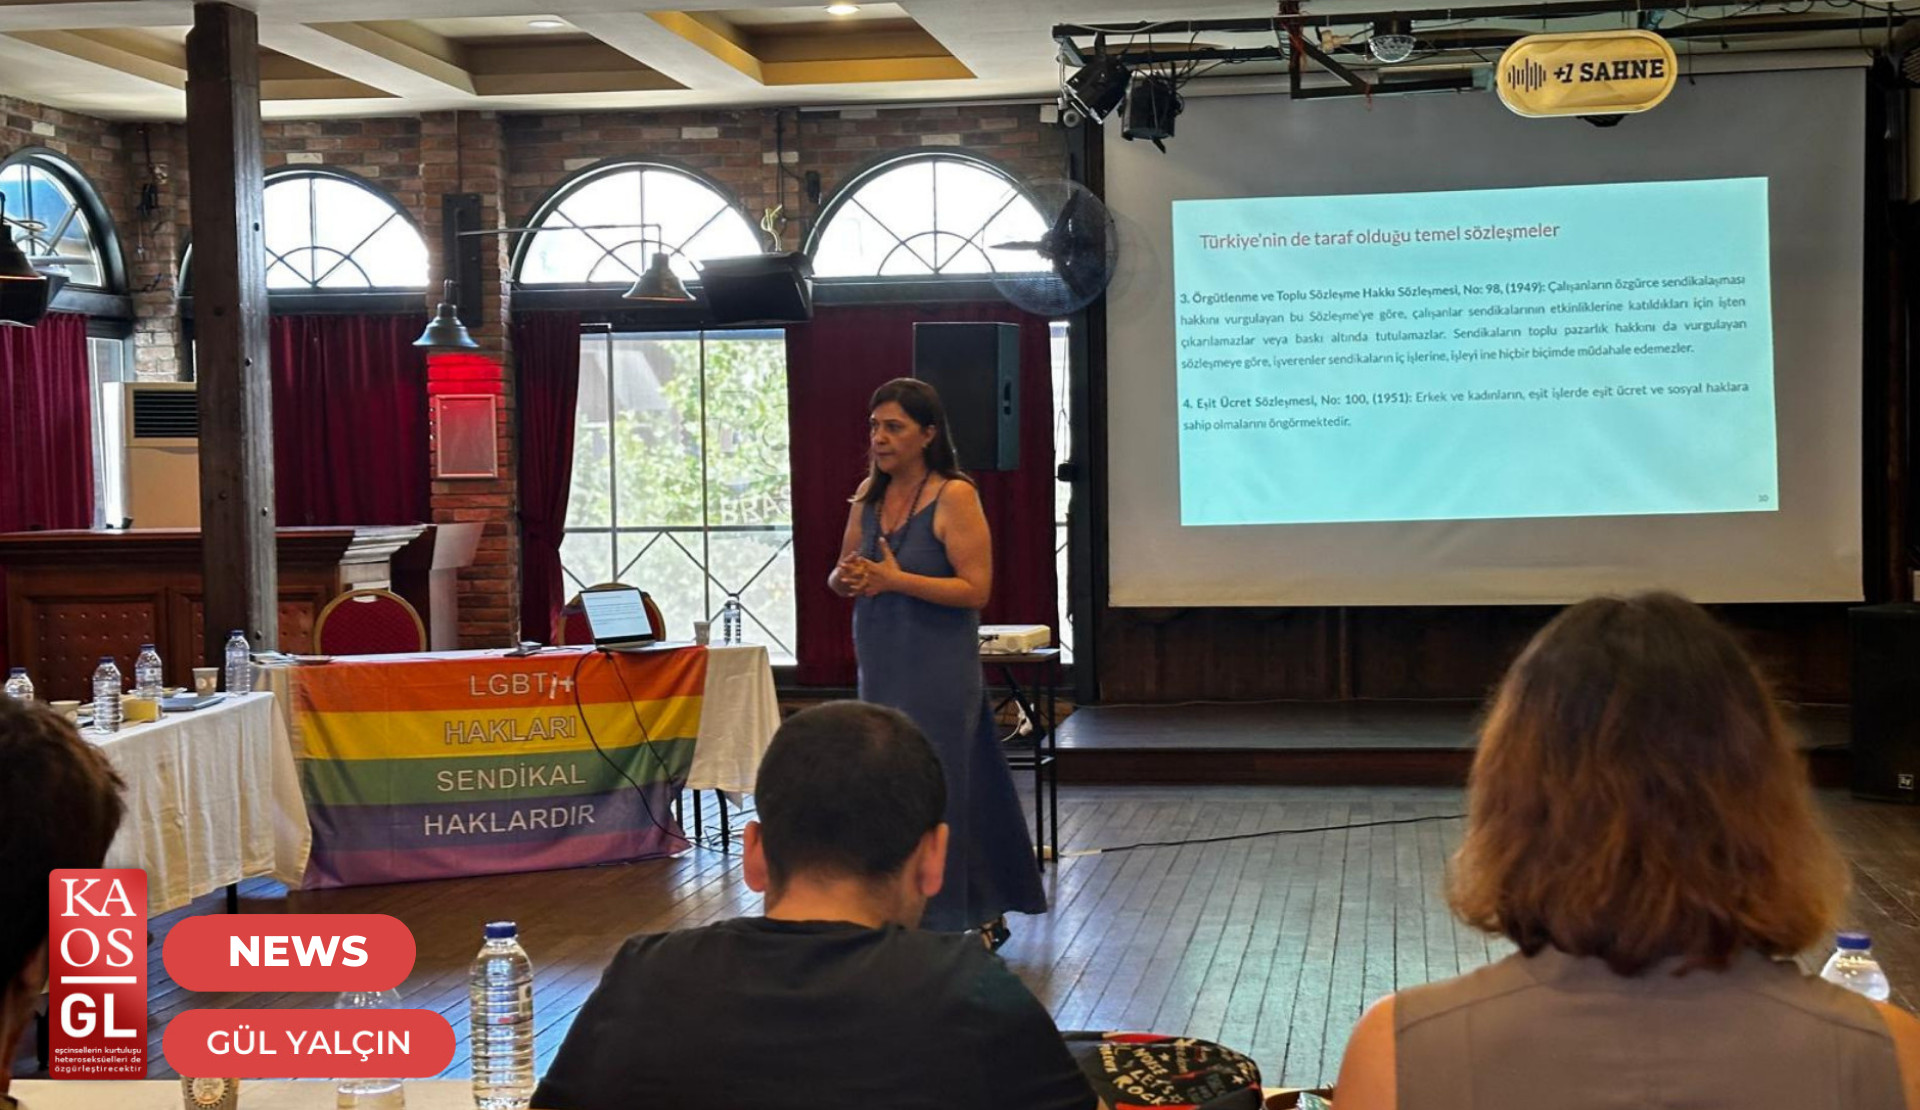 “Strong activism is necessary for LGBTI+ organization in trade unions” | Kaos GL - News Portal for LGBTI+